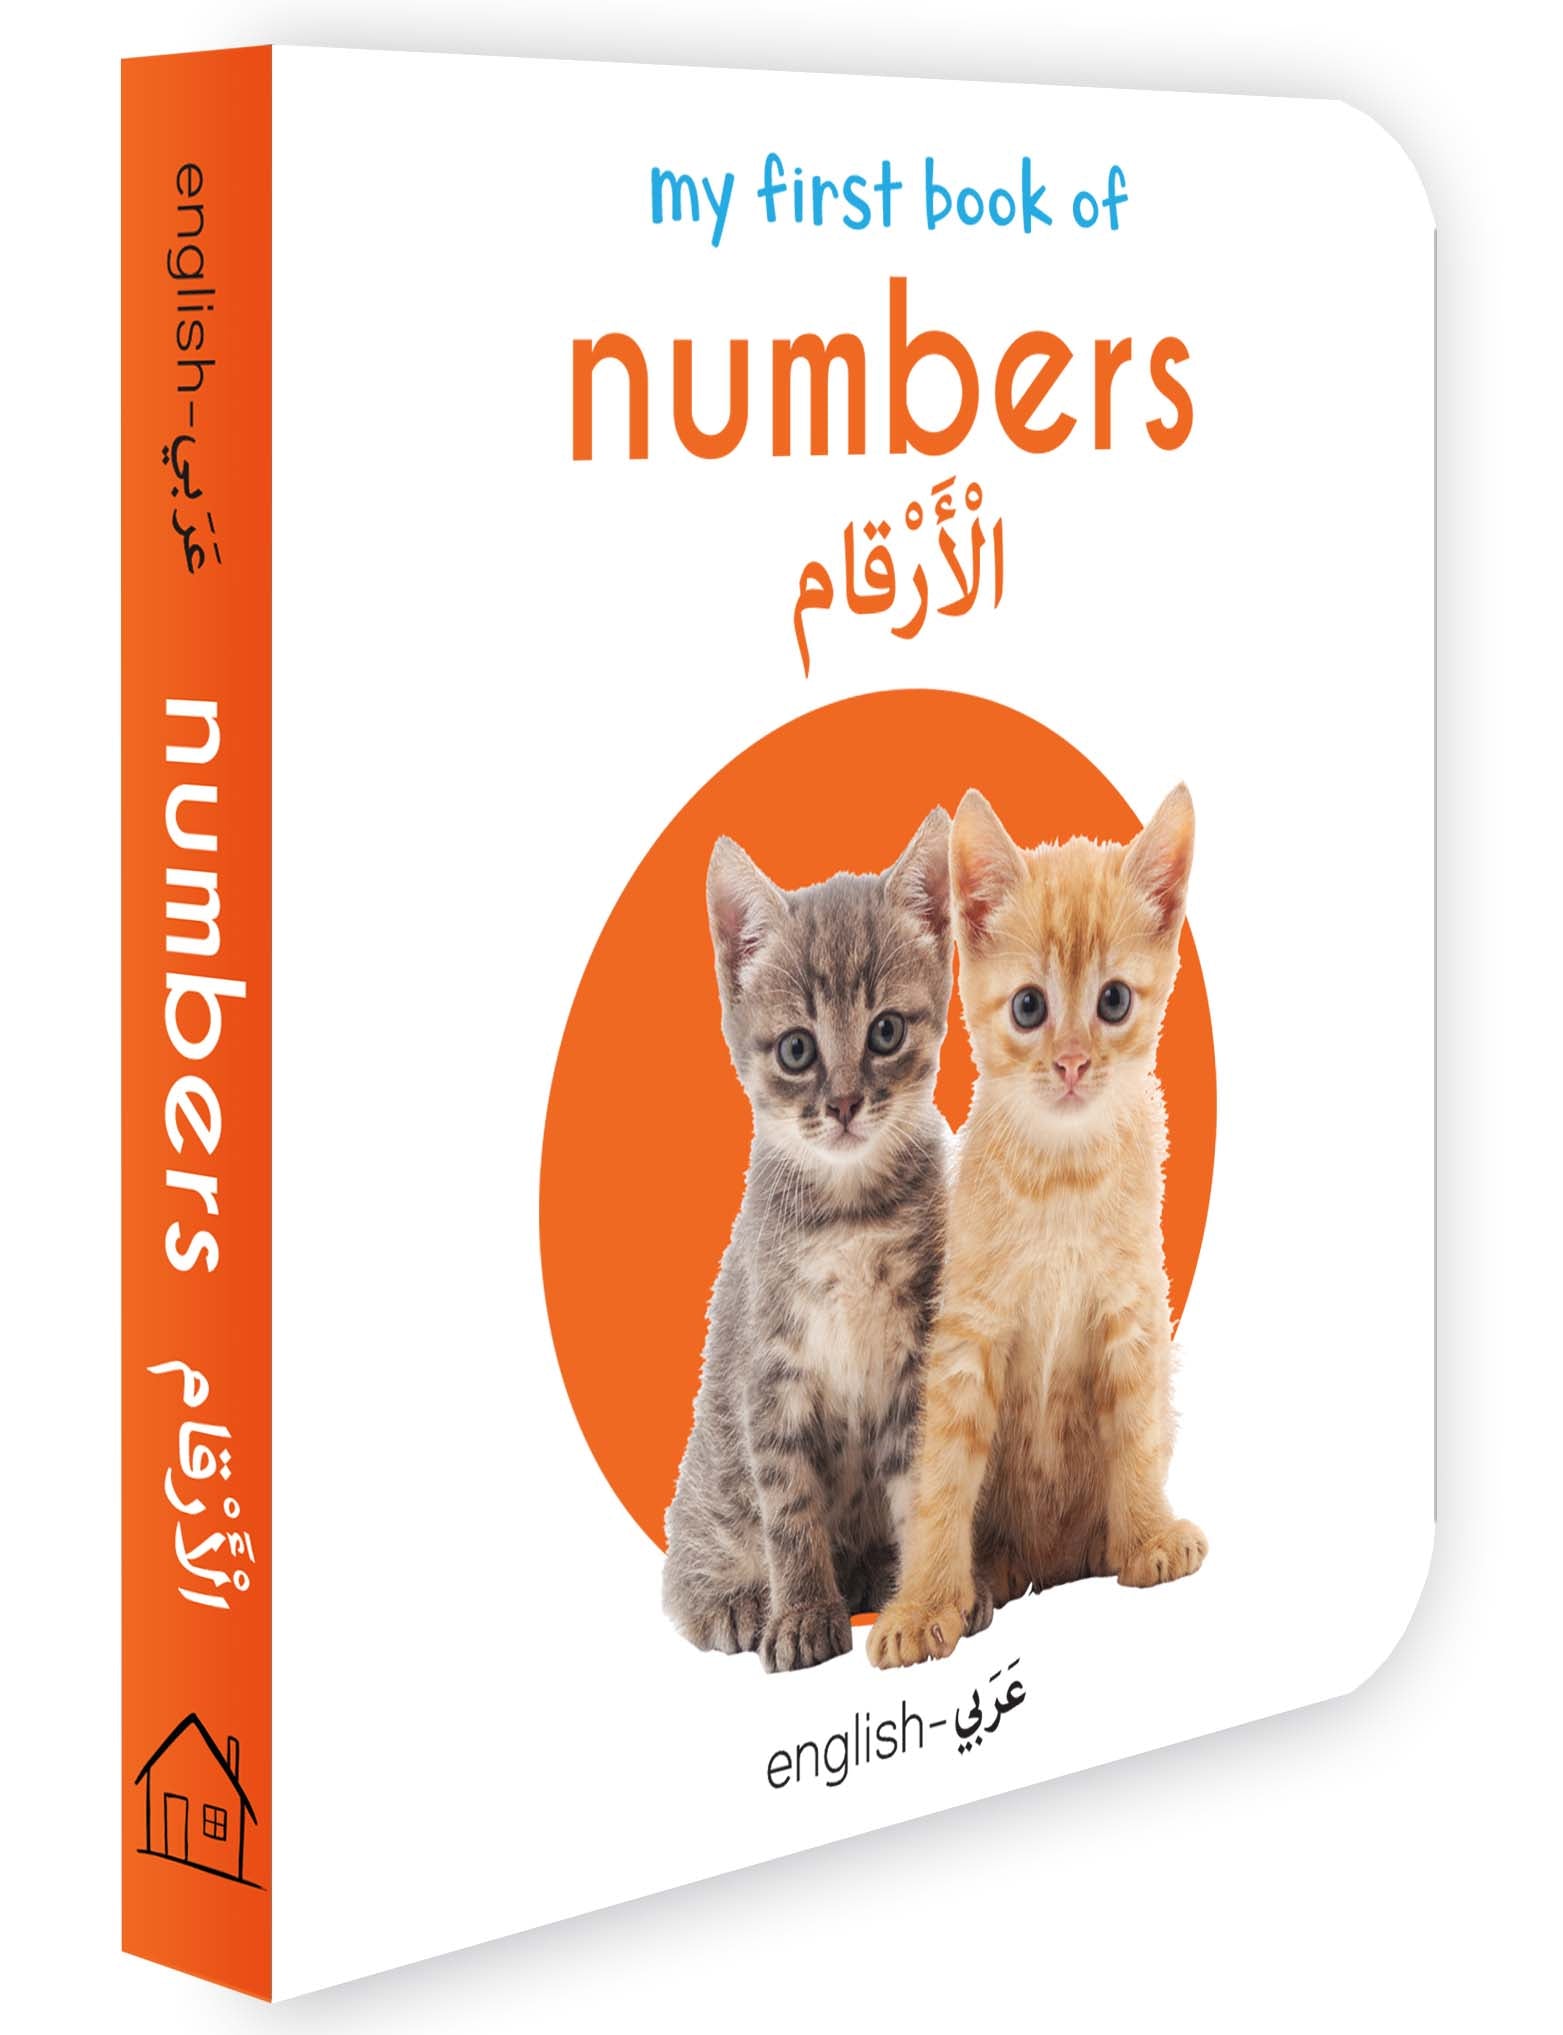 My First Book of Numbers (English-Arabic) - Bilingual Learning Library